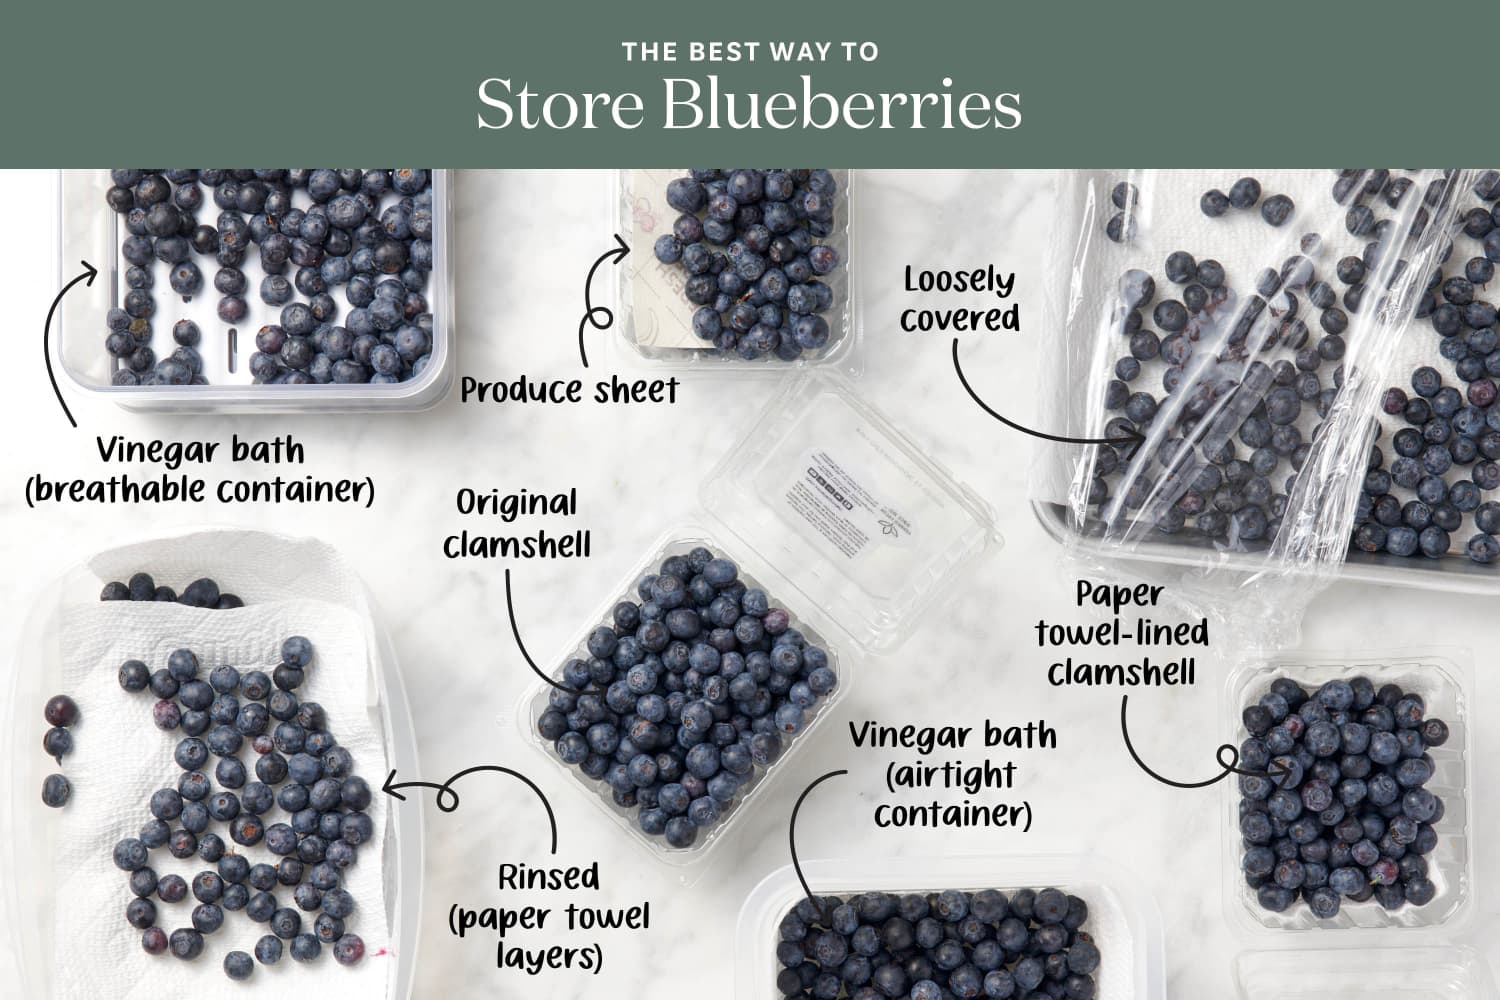 We Tried 7 Methods for Storing Blueberries and the Winner Outlasted Them All